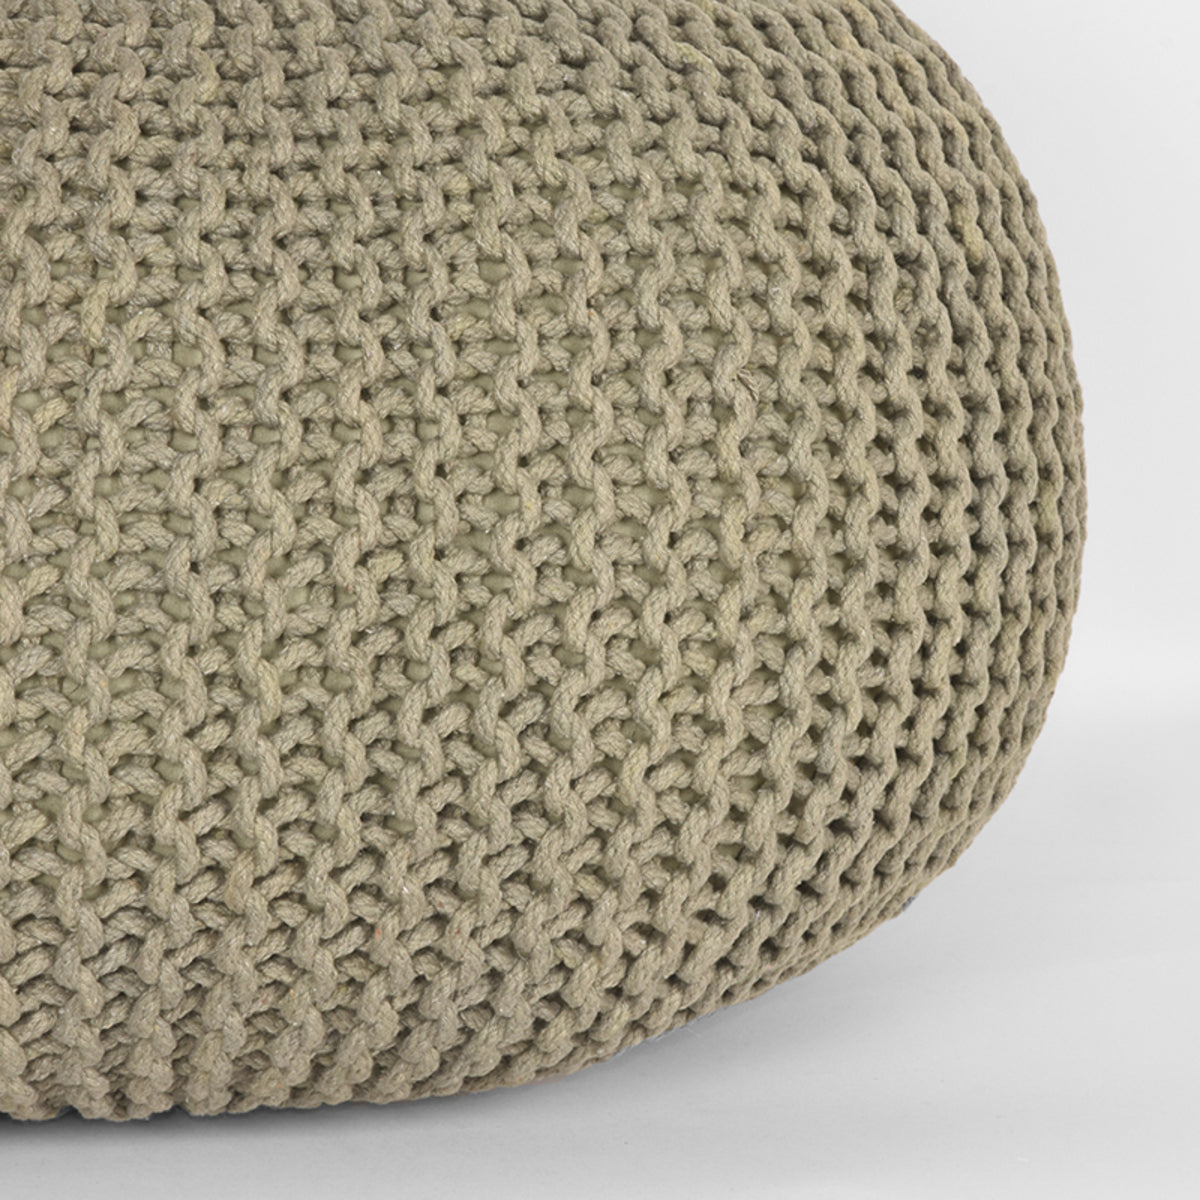 LABEL51 Pouf Knitted - Olive green - Cotton - L